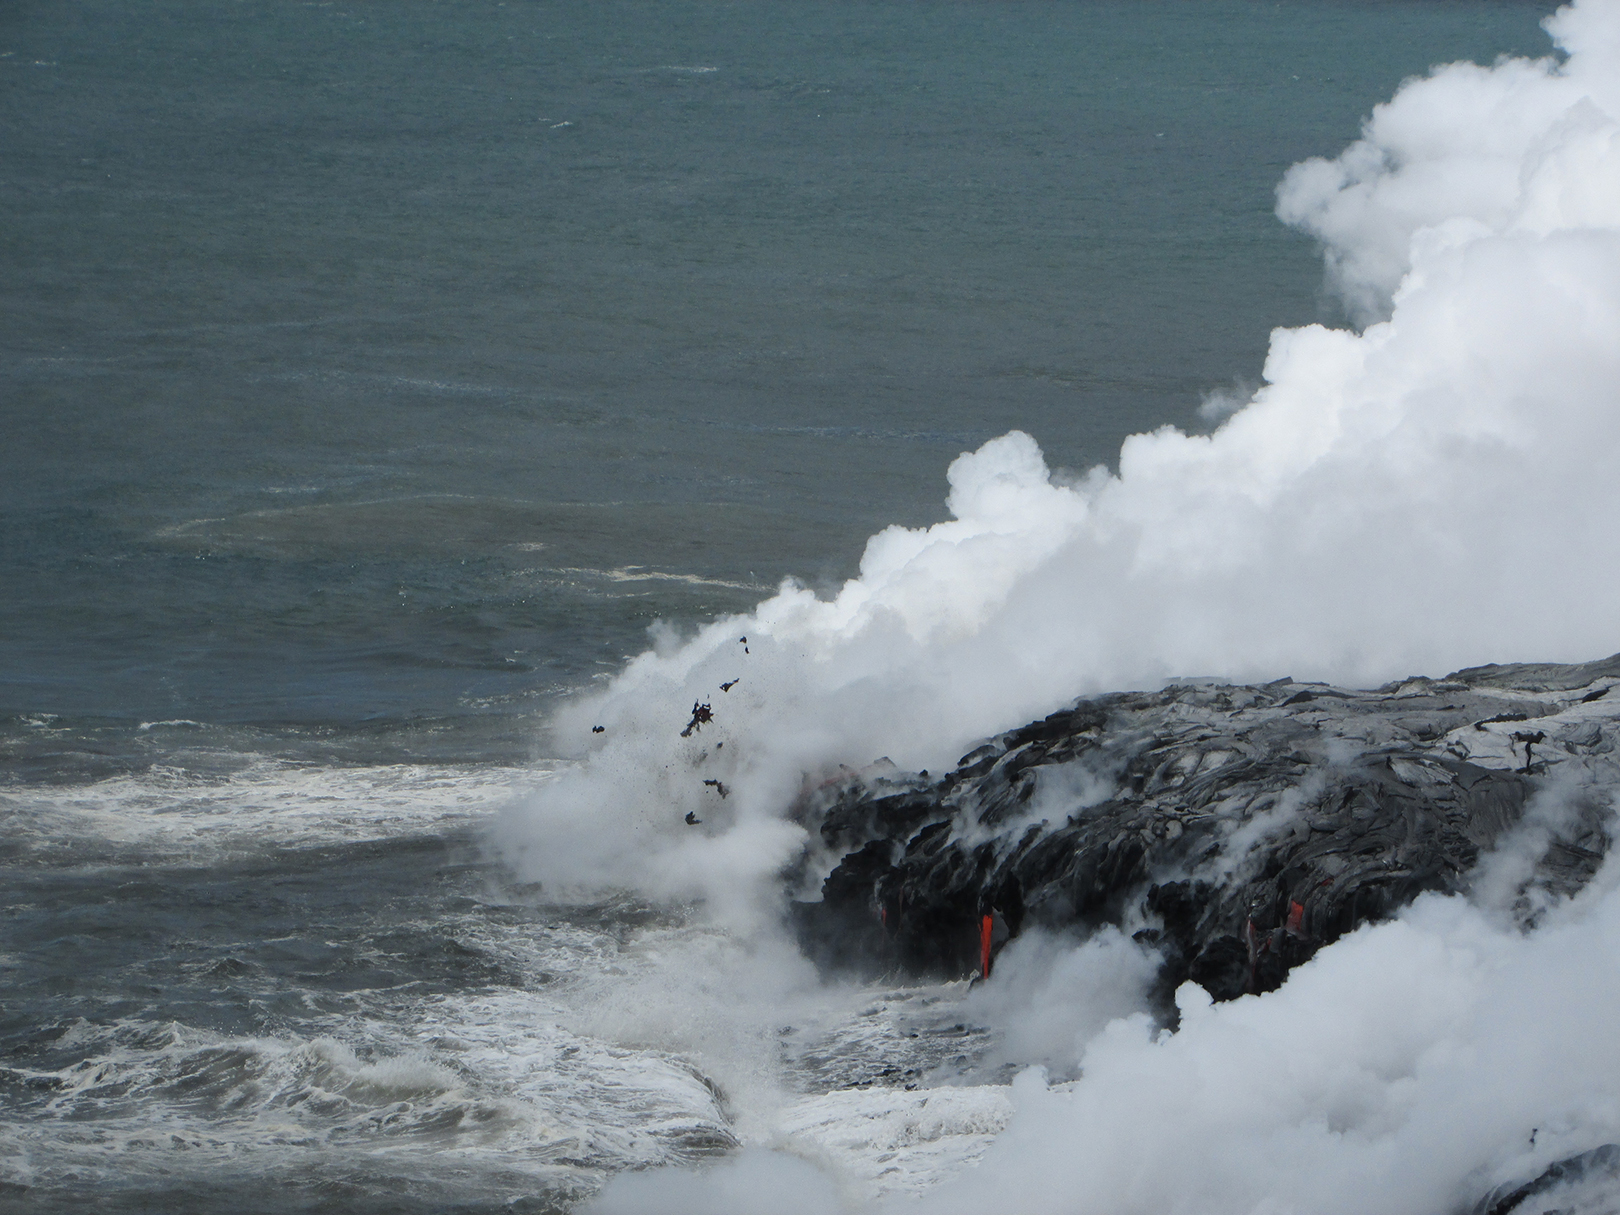 The explosive interaction of hot lava entering cool seawater throws spatter (clots of molten lava, visible at center of image) from the leading edge of the lava delta forming at Kīlauea’s Kamokuna ocean entry. This vigorous interaction also generates a billowy white "laze" plume composed of condensed seawater steam laced with hydrochloric acid and tiny shards of volcanic glass. The plume cloud is especially hazardous for visitors who, in an effort to see the ocean entry, venture beyond posted warning signs along the coast. USGS photo.